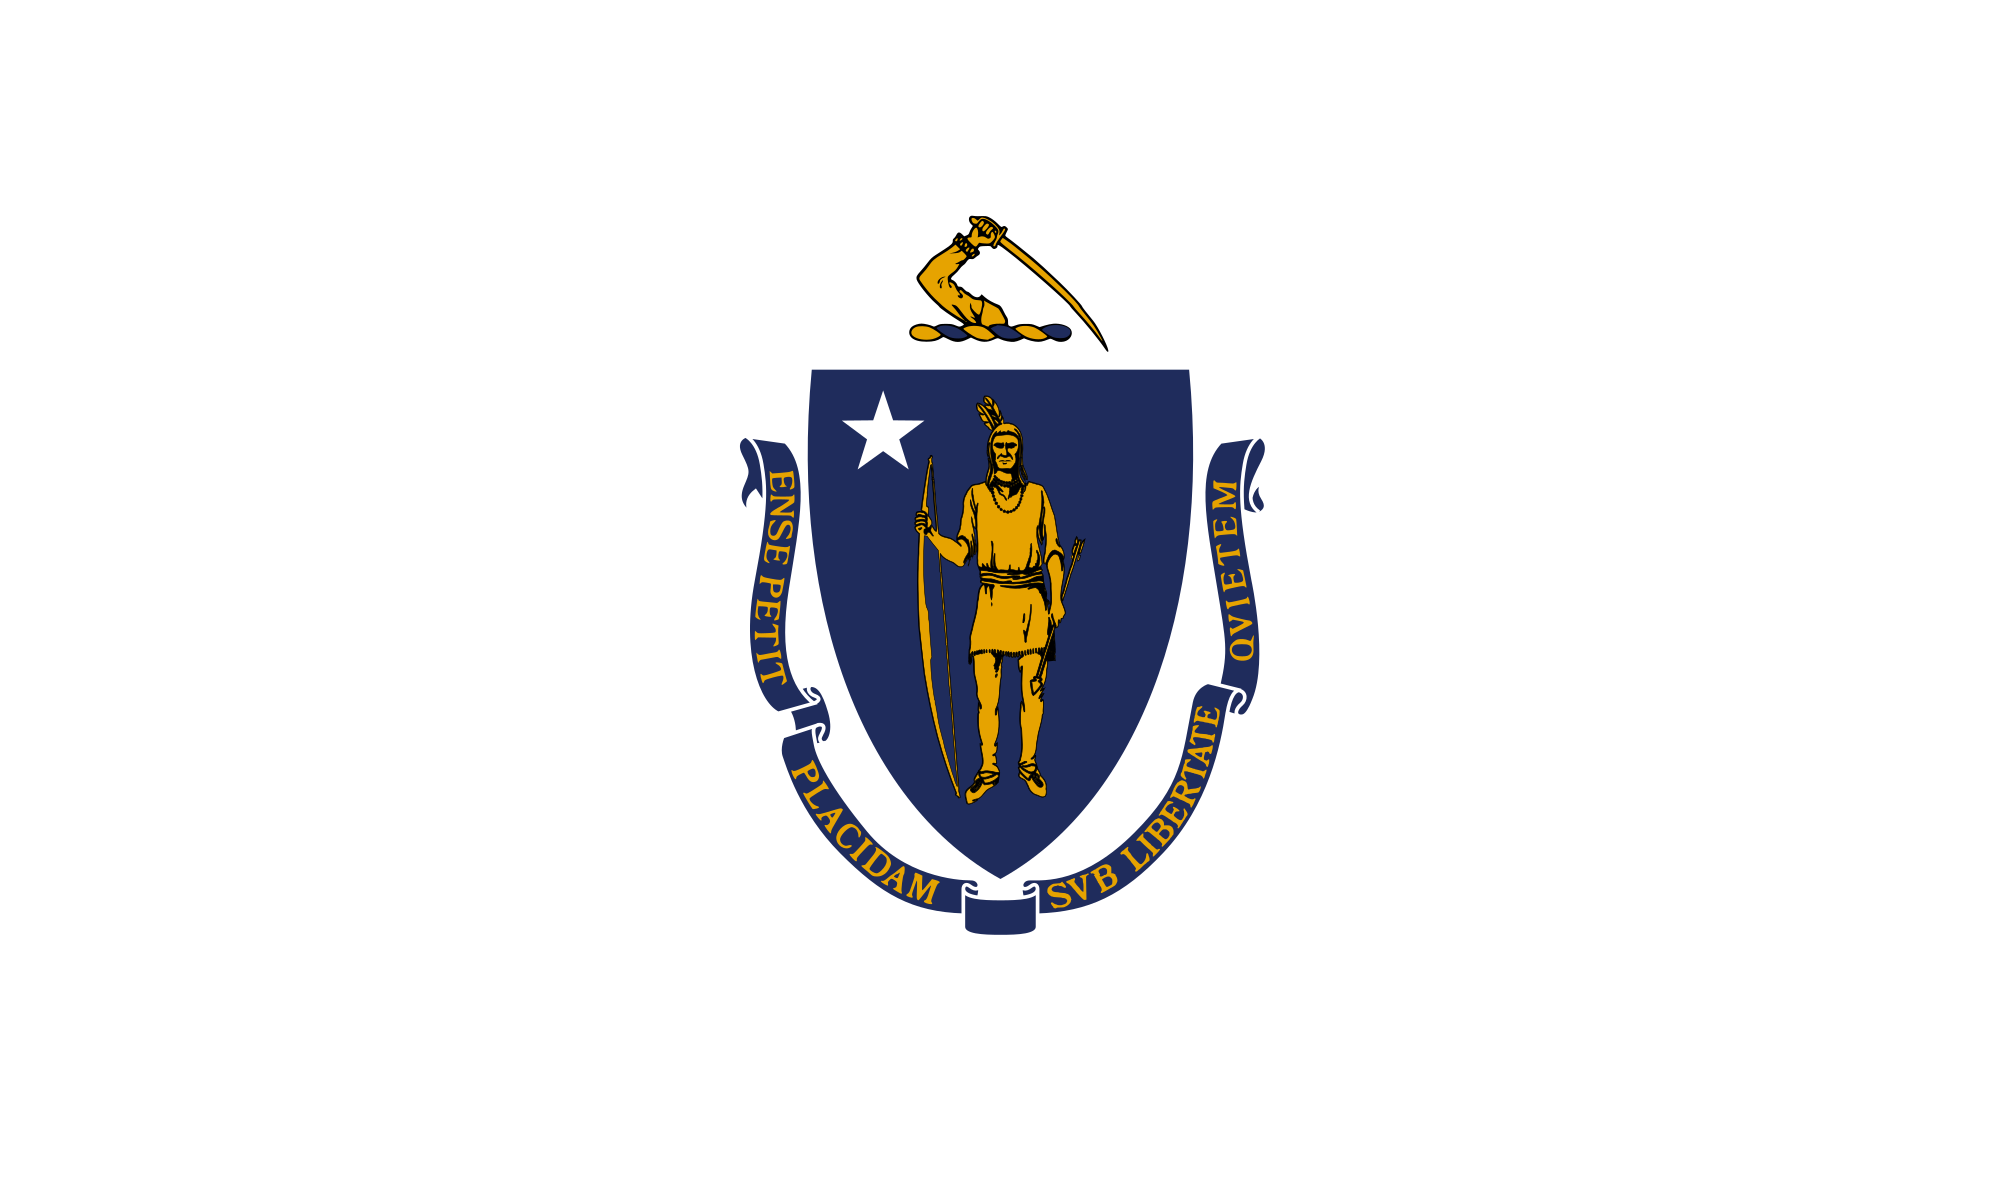 Image representing Massachusetts state or its flag